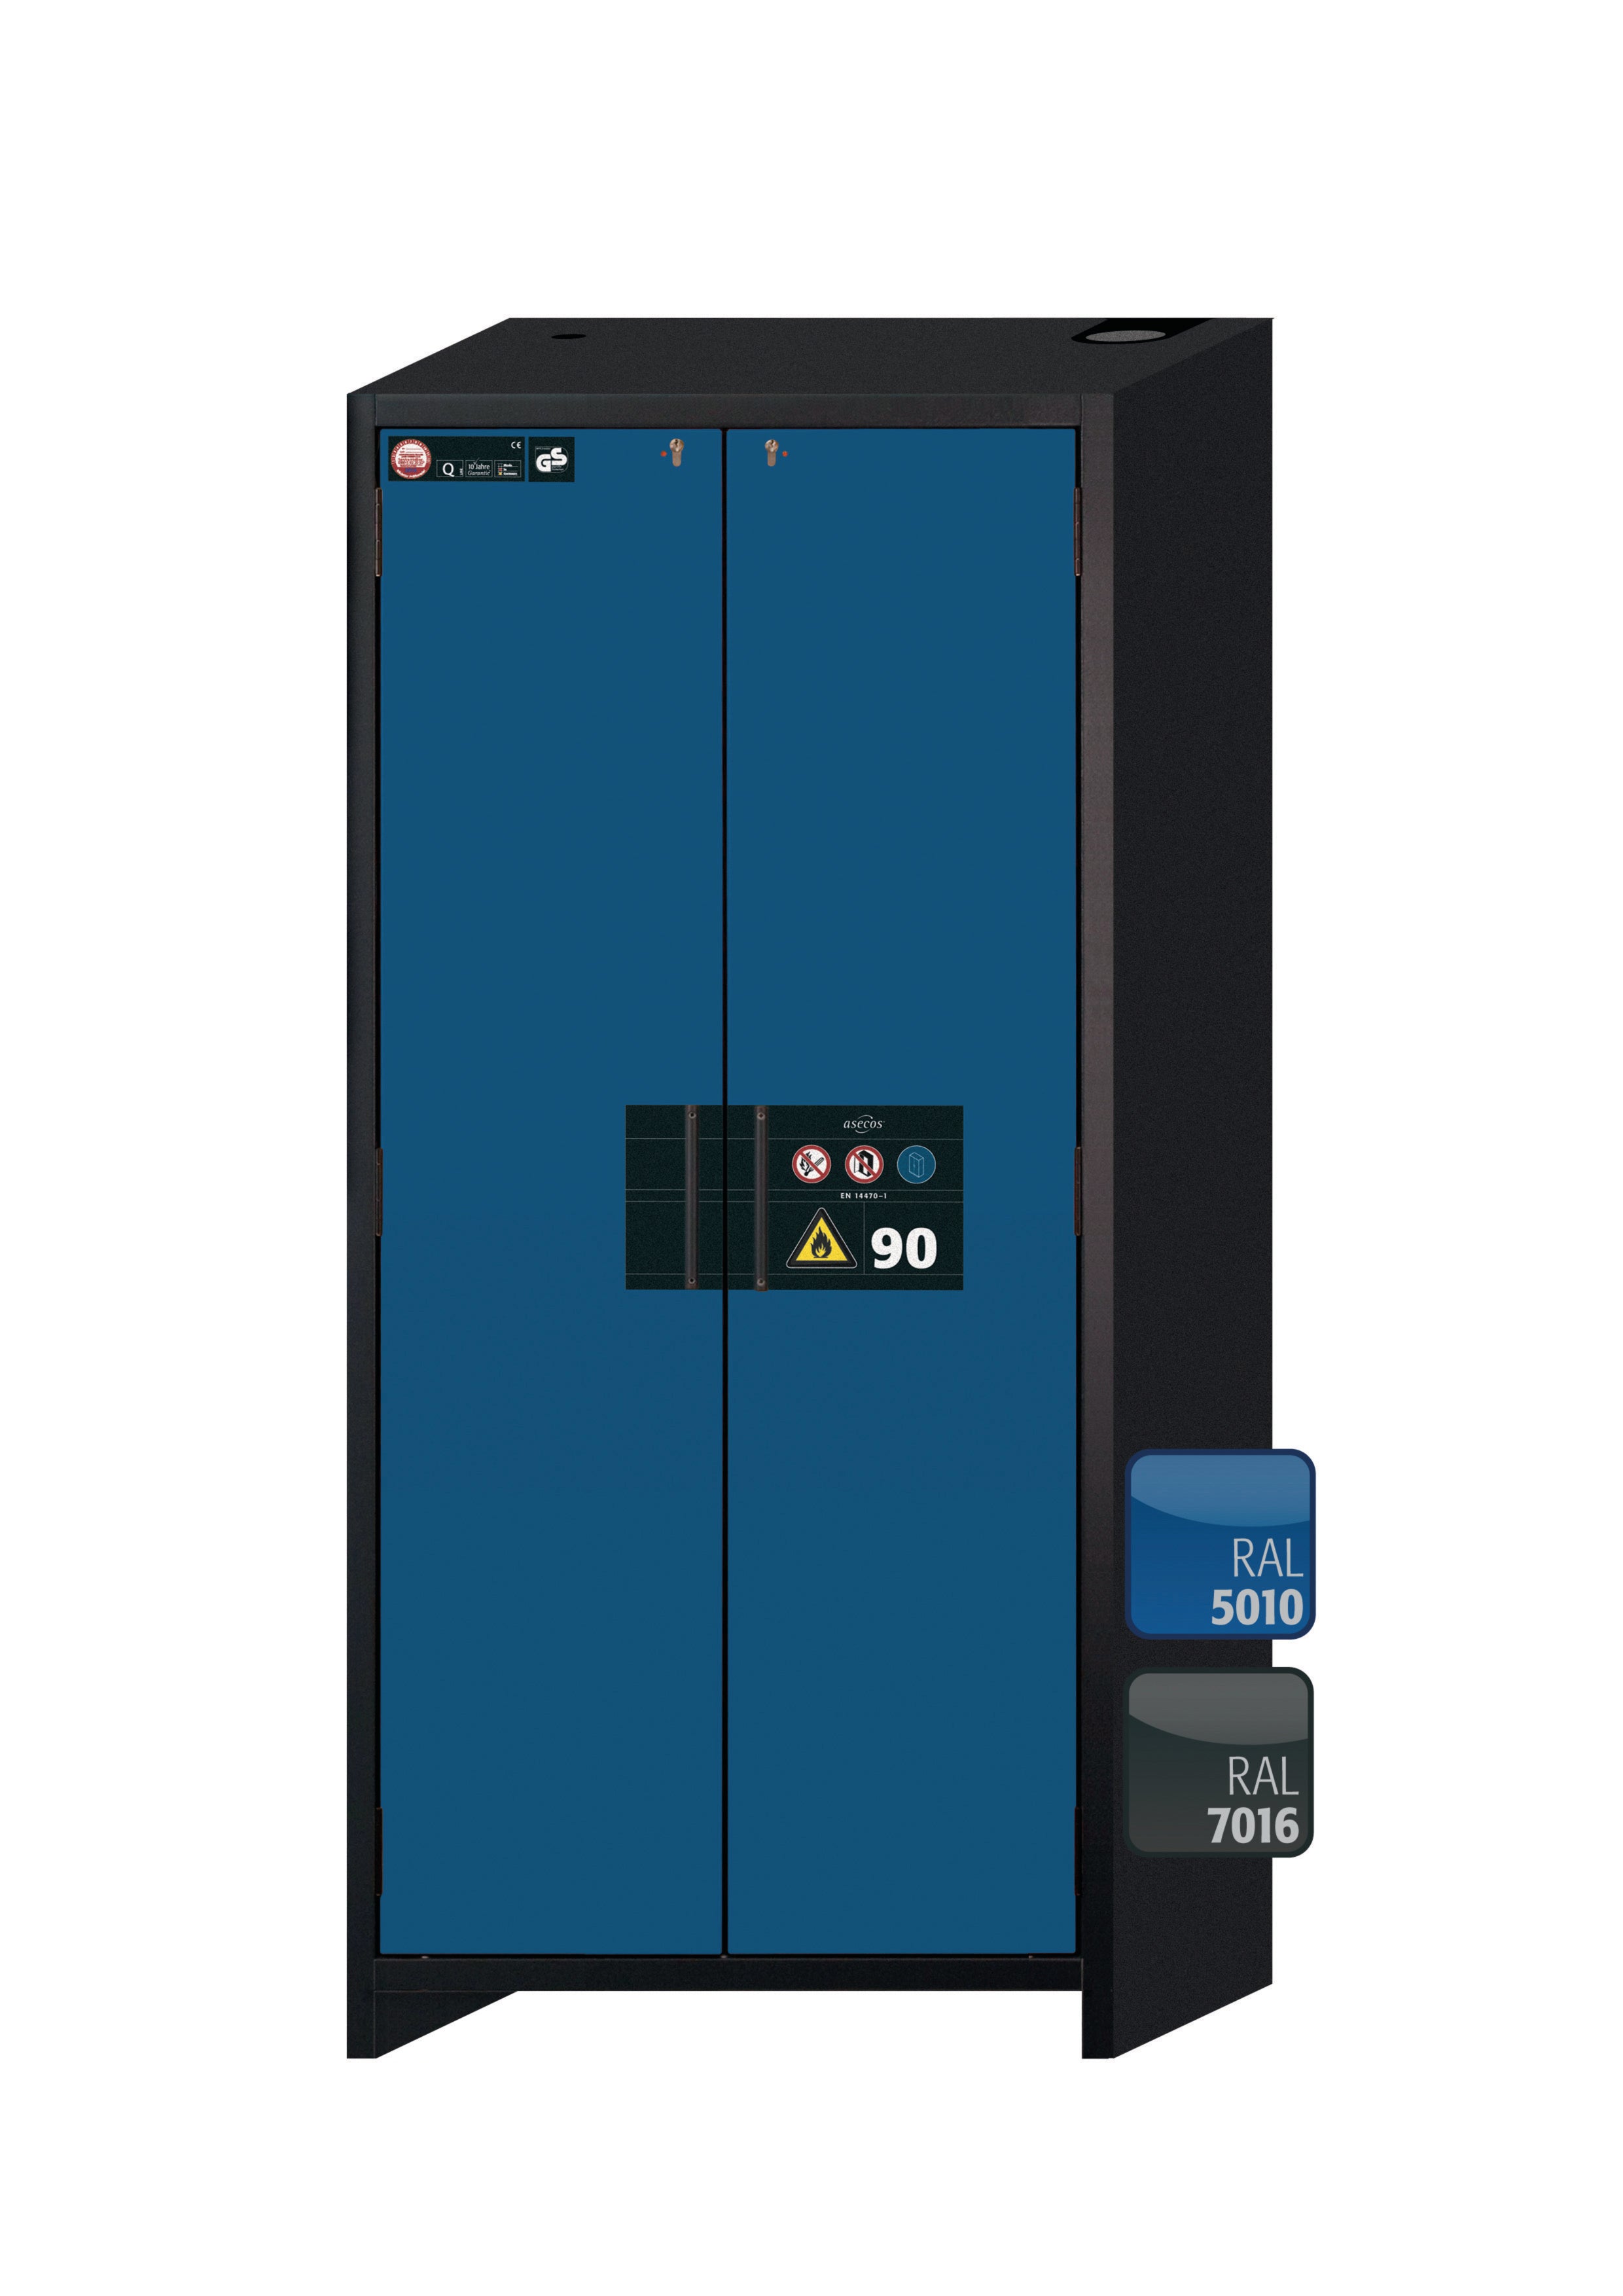 Type 90 safety storage cabinet Q-CLASSIC-90 model Q90.195.090 in gentian blue RAL 5010 with 6x drawer (standard) (stainless steel 1.4301),